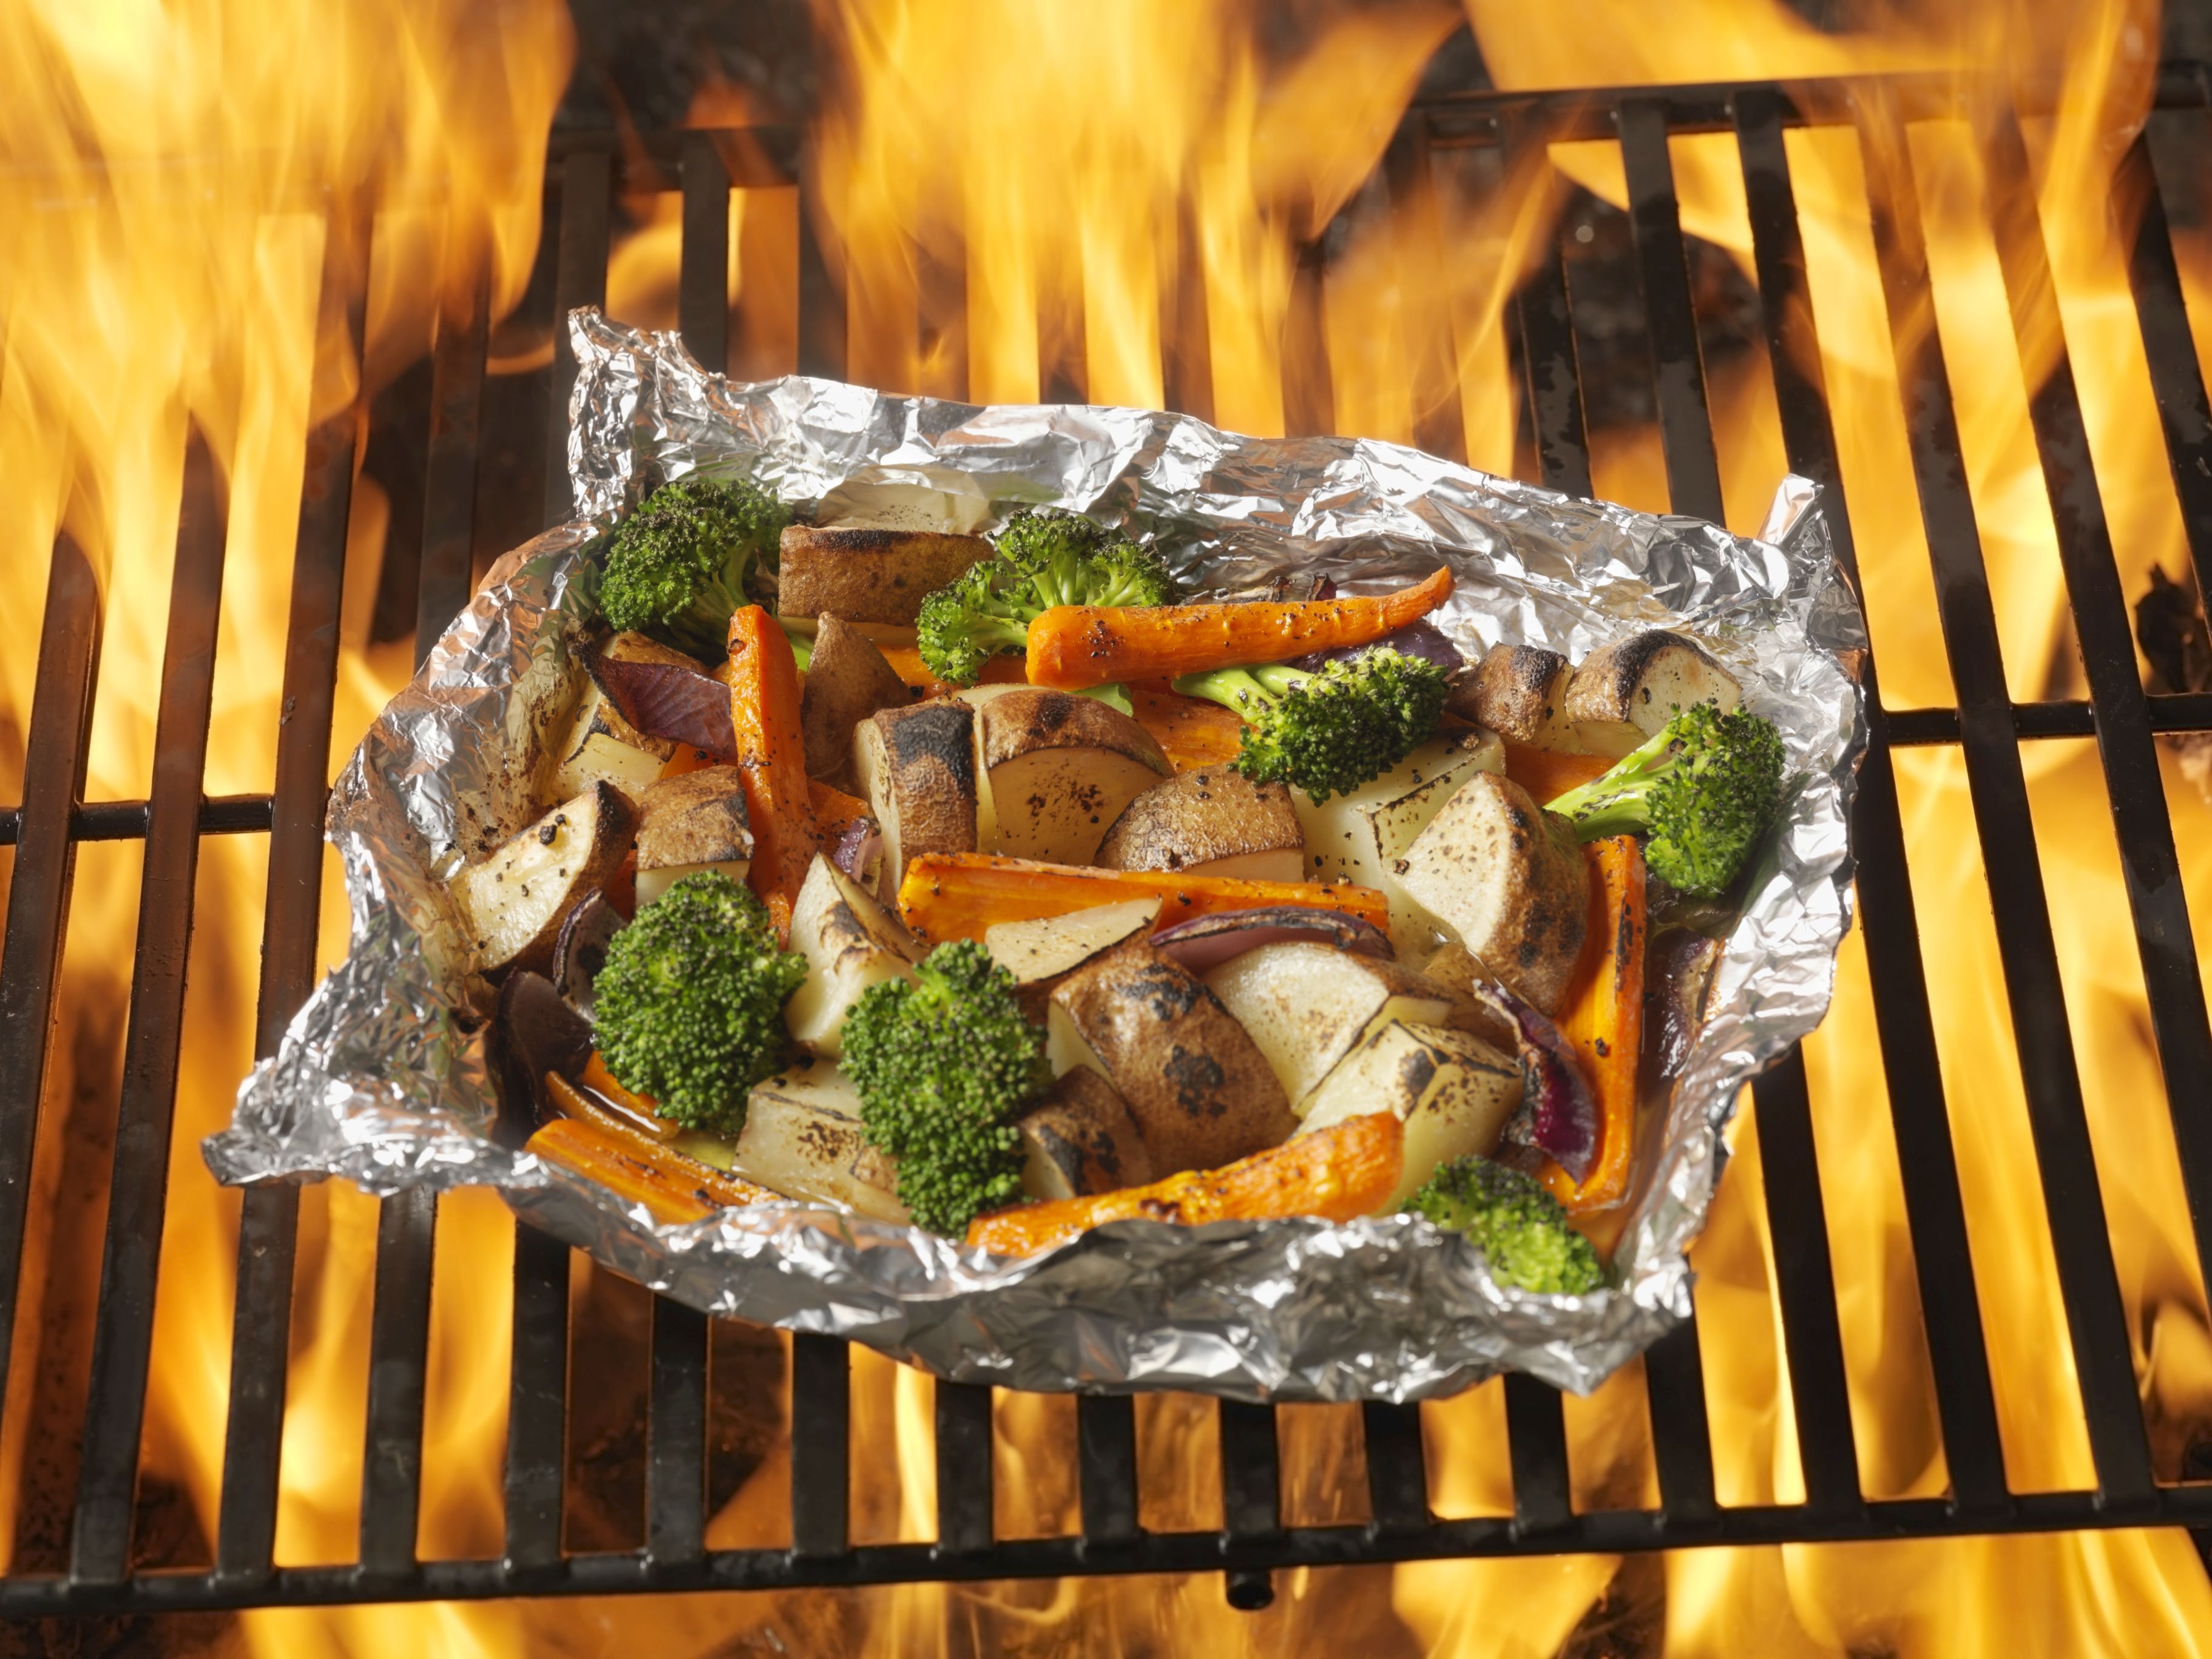 Top Recipes for Camping Meals: Foil-Wrapped Vegetables